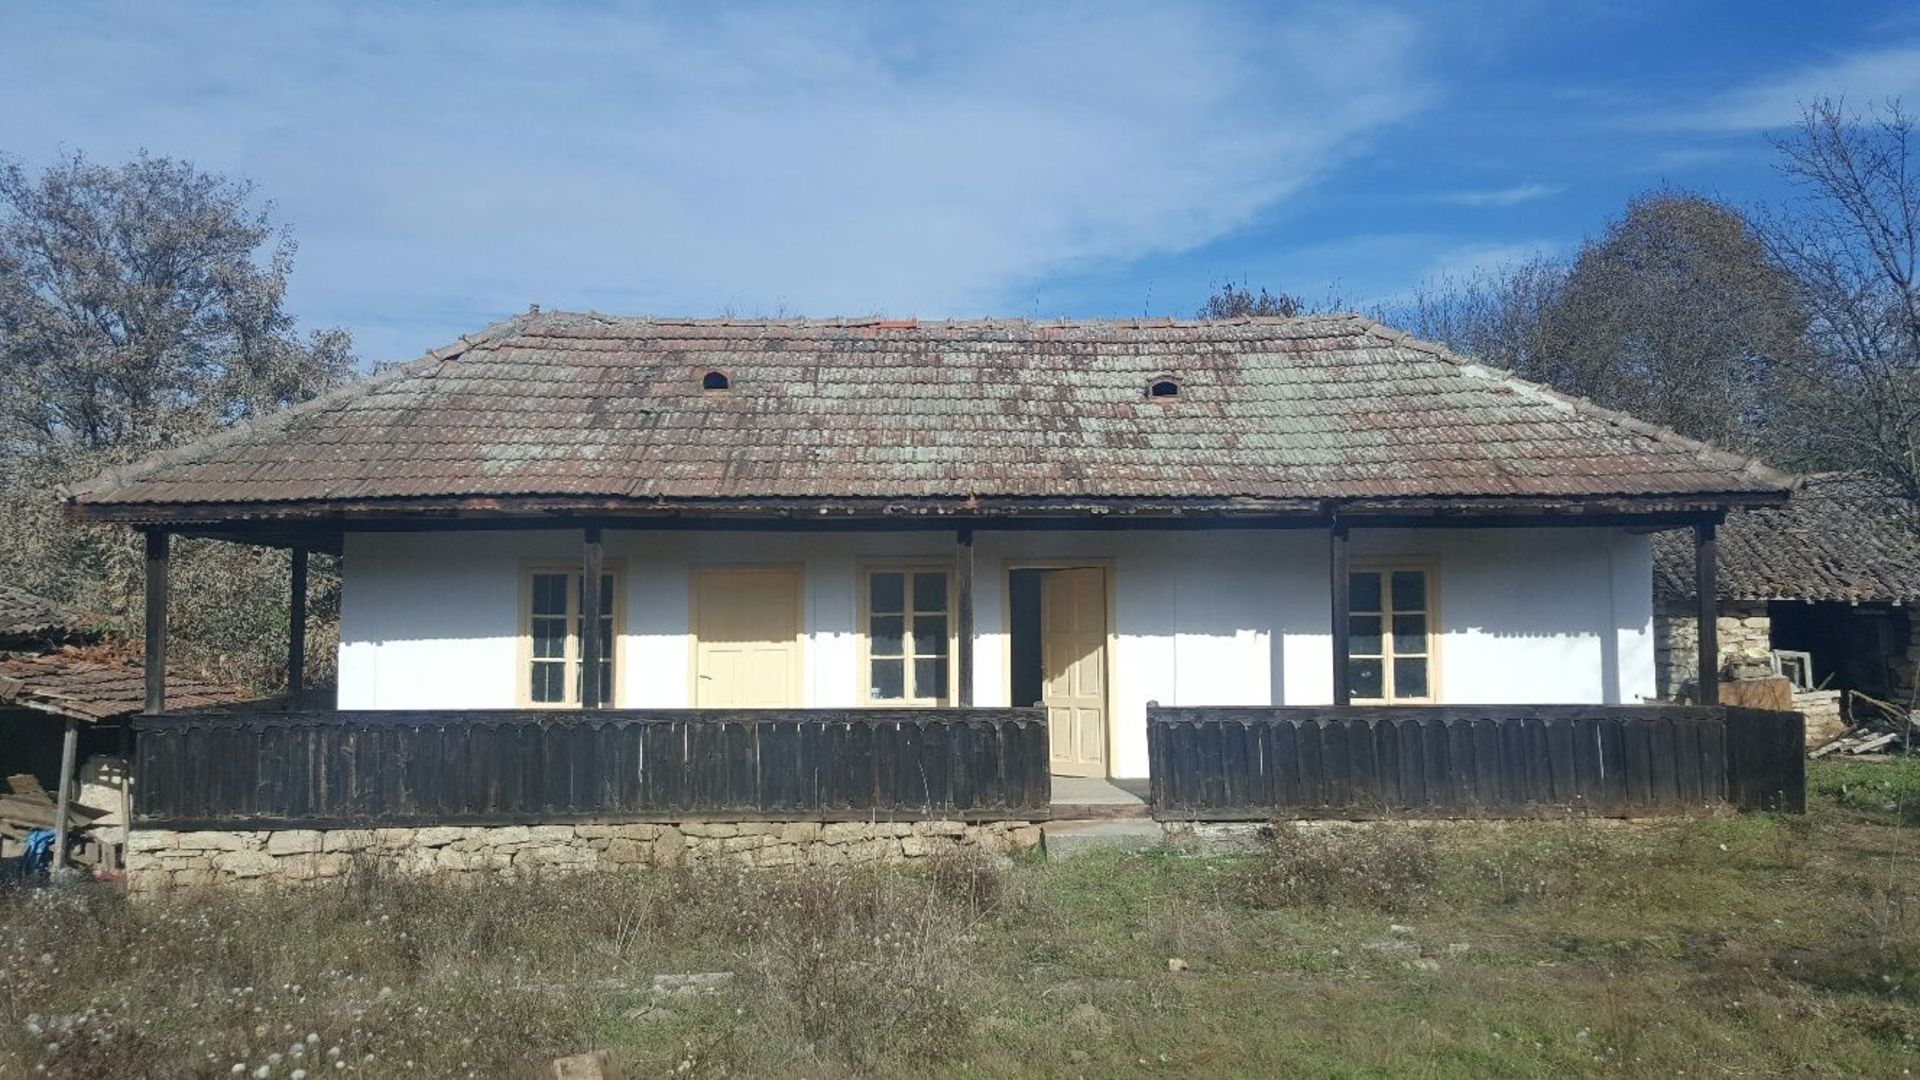 VERY SOLID 3 BED GERMAN COTTAGE WITH ABOUT 2 ACRES OF LAND AND RIVER, NOT FAR FROM BULGARIAN COAST